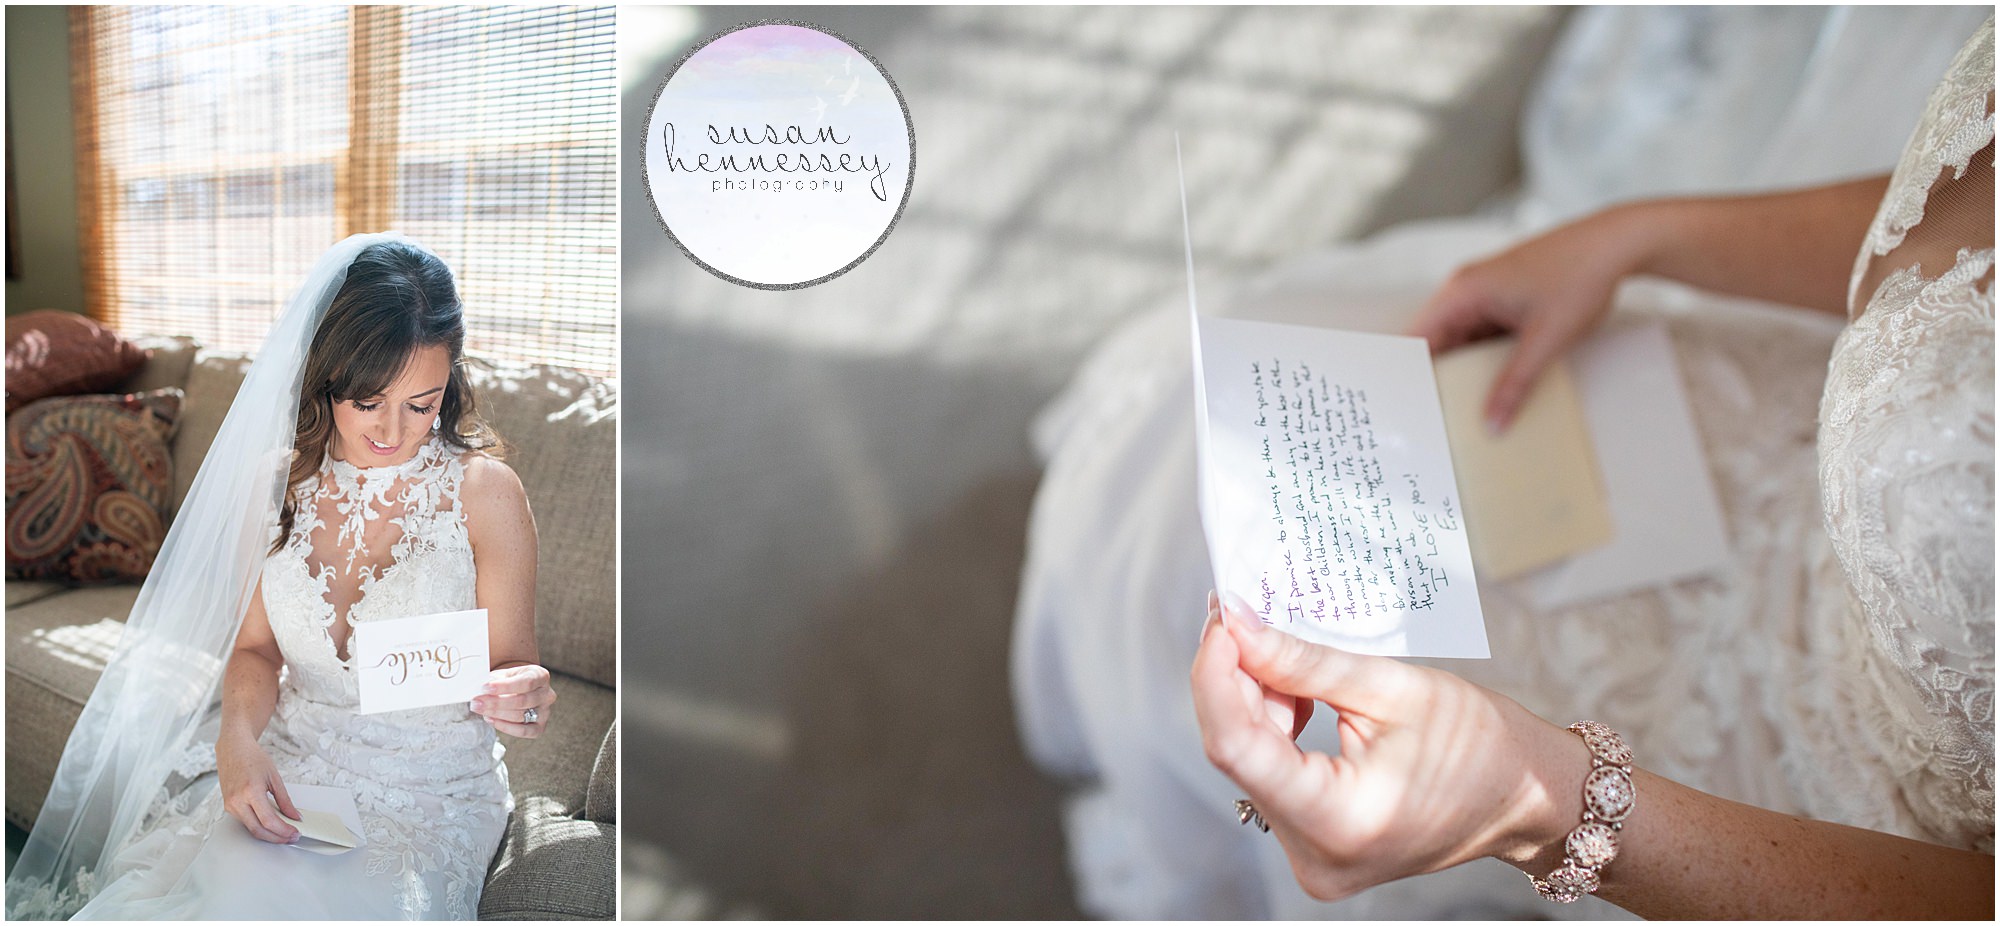 A bride reads a handwritten letter from the groom